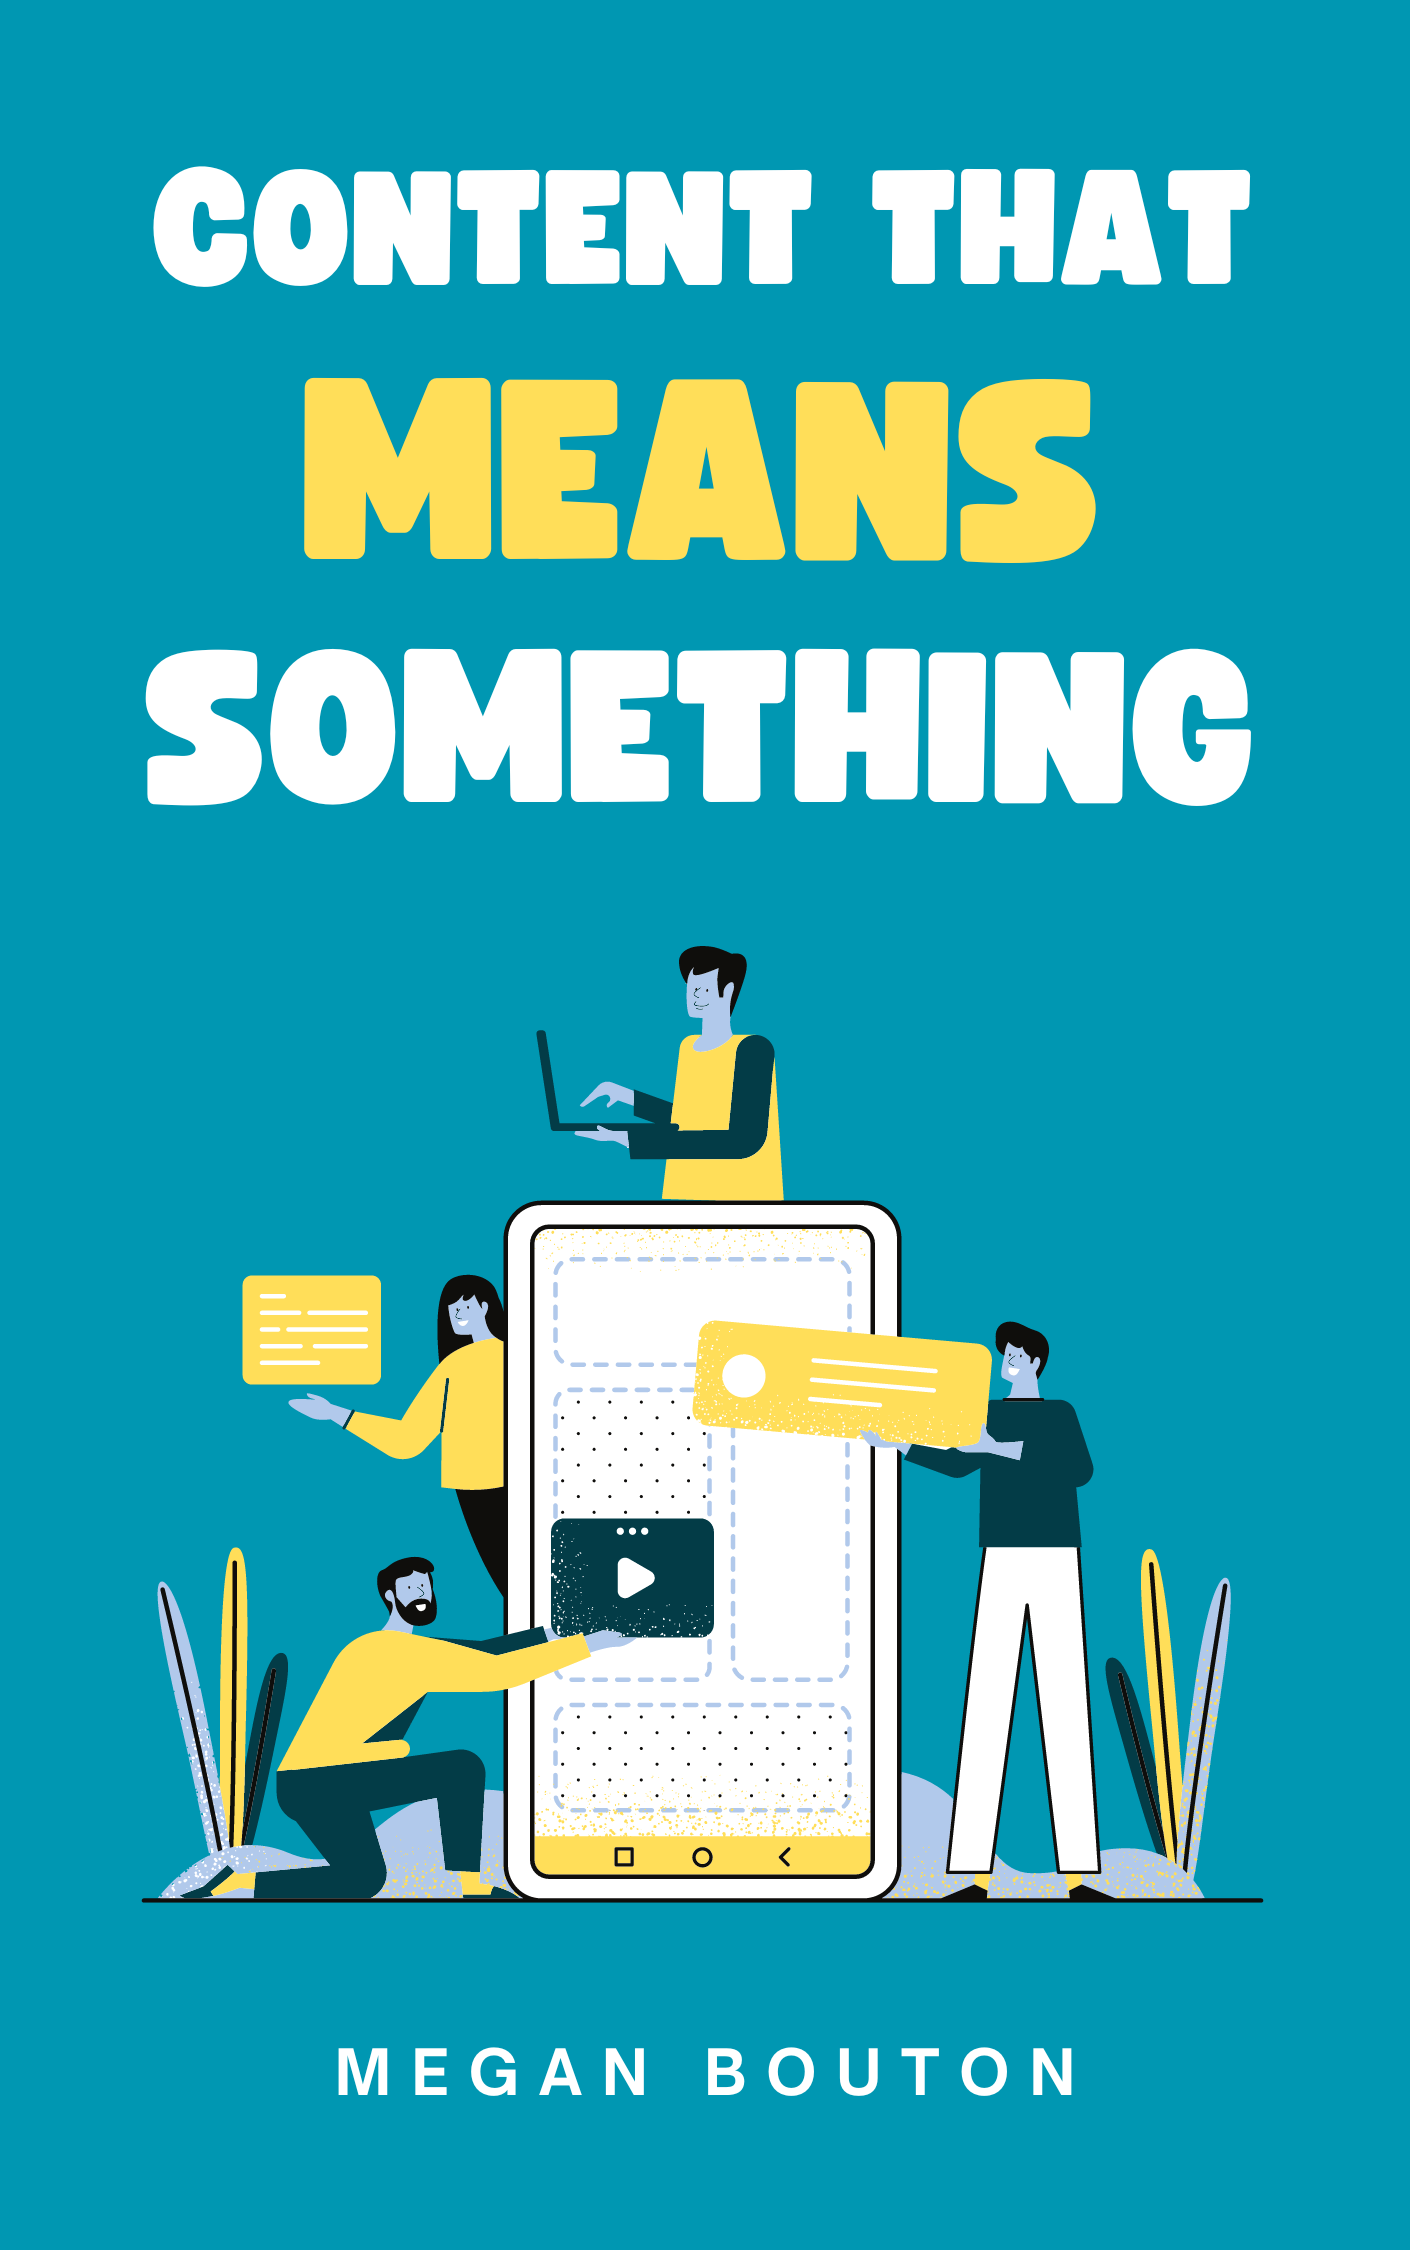 Content that means something, by Megan Bouton